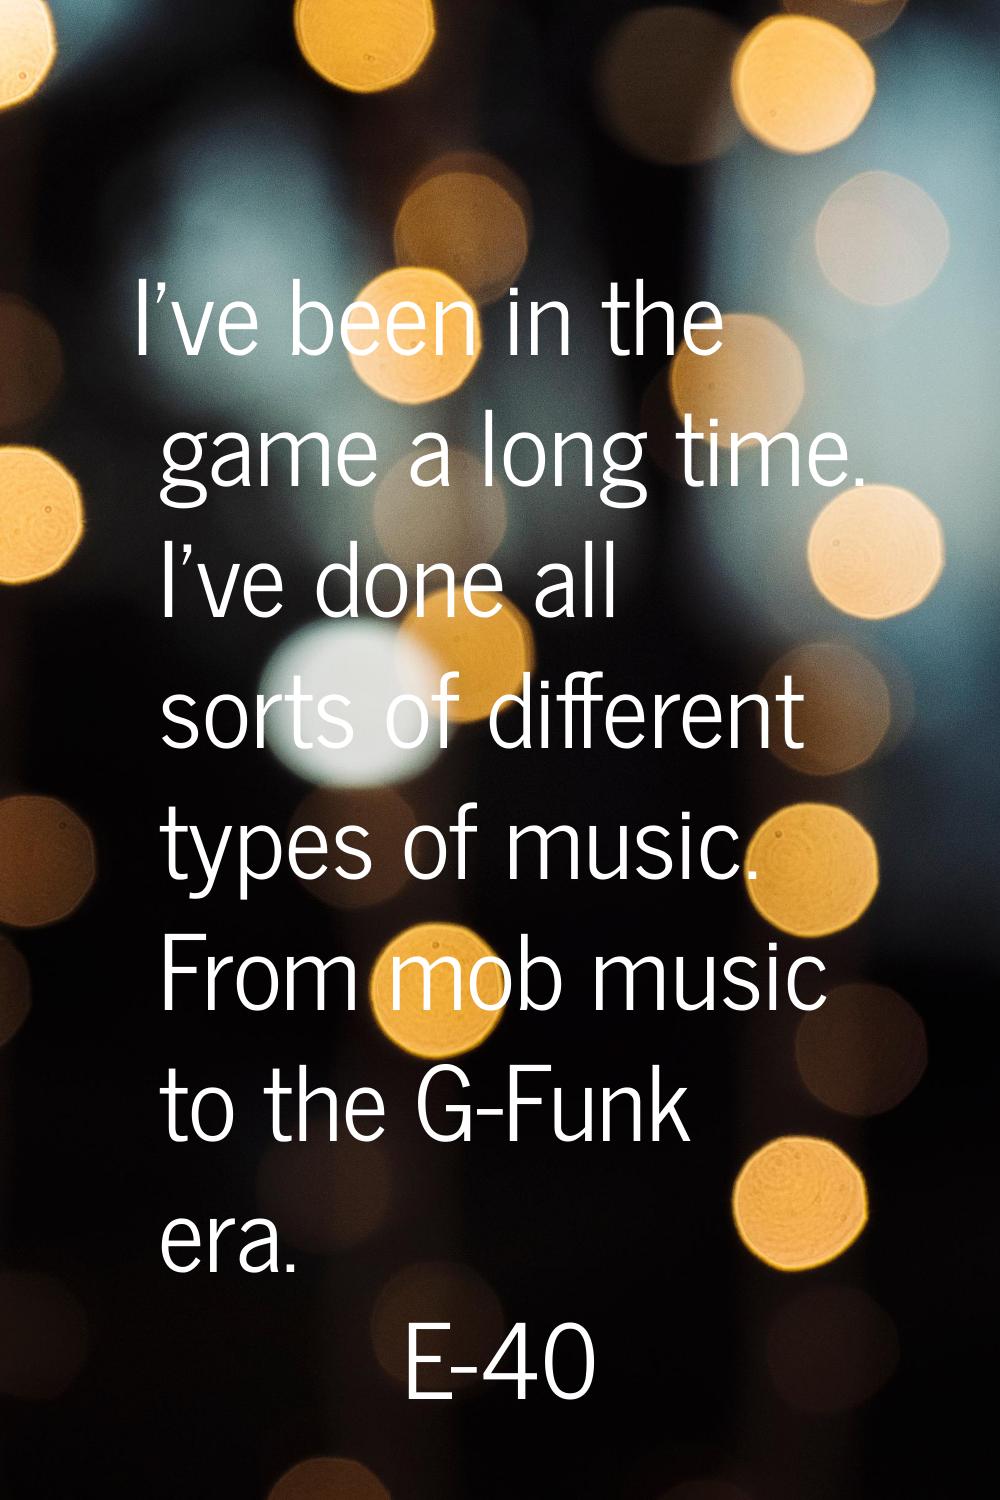 I've been in the game a long time. I've done all sorts of different types of music. From mob music 